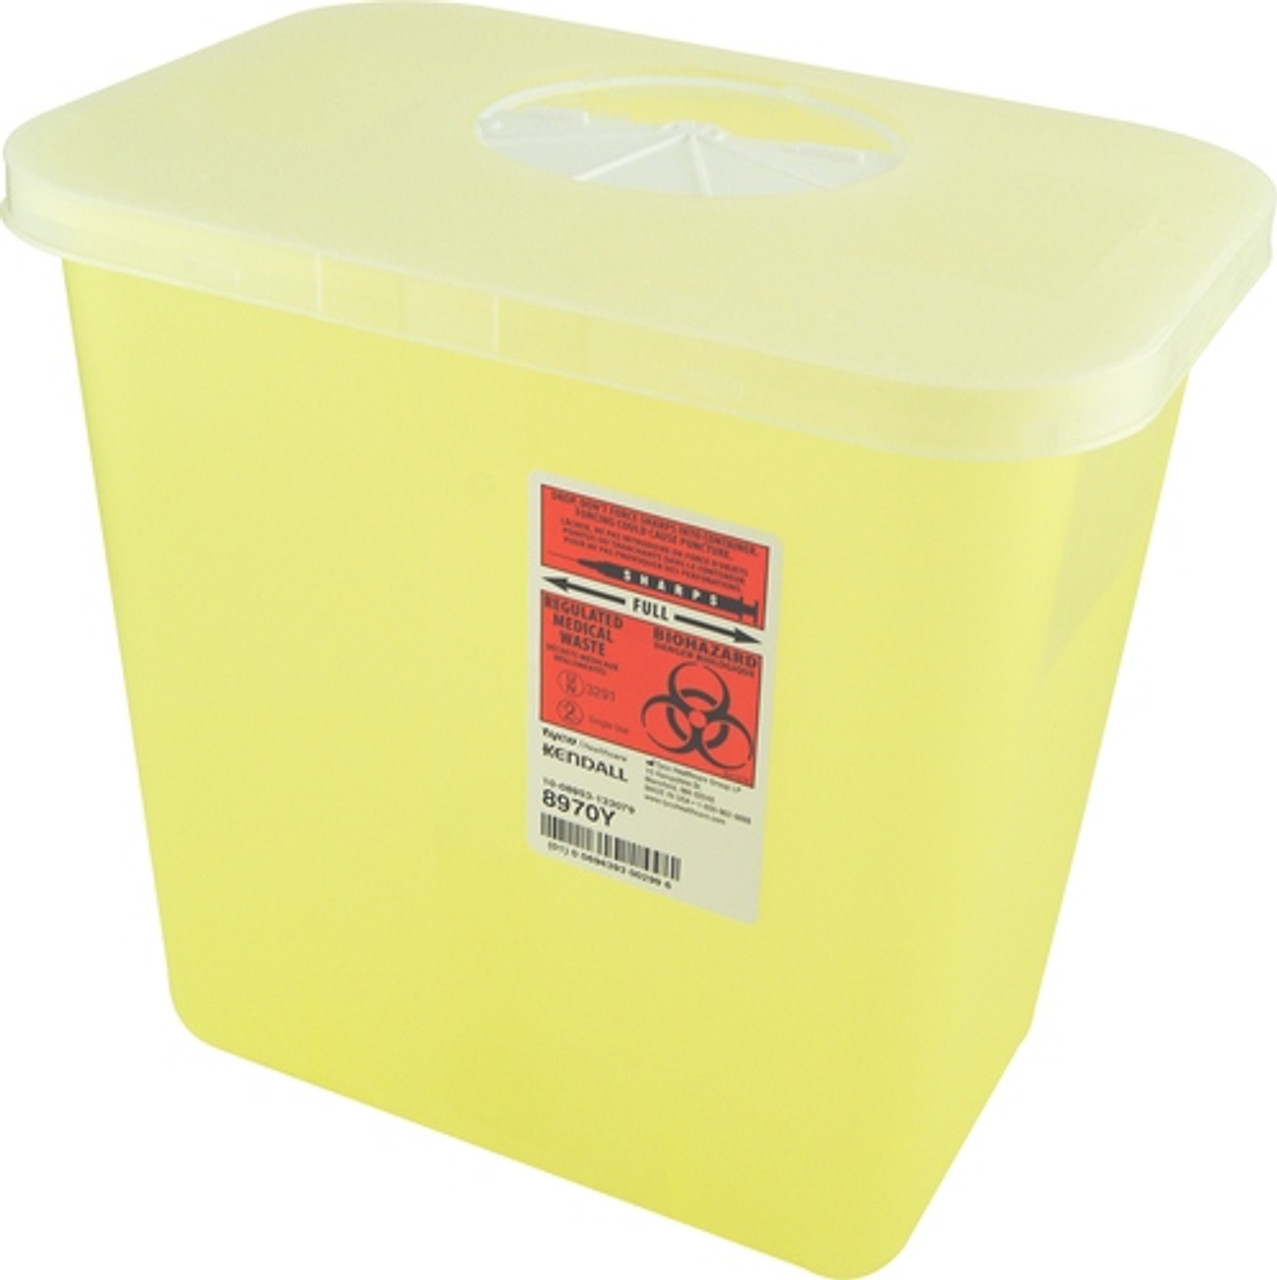 Kendall 8970Y (CA20) MULTI-PURPOSE SHARPS CONTAINER WITH ROTOR OPENING, YELLOW